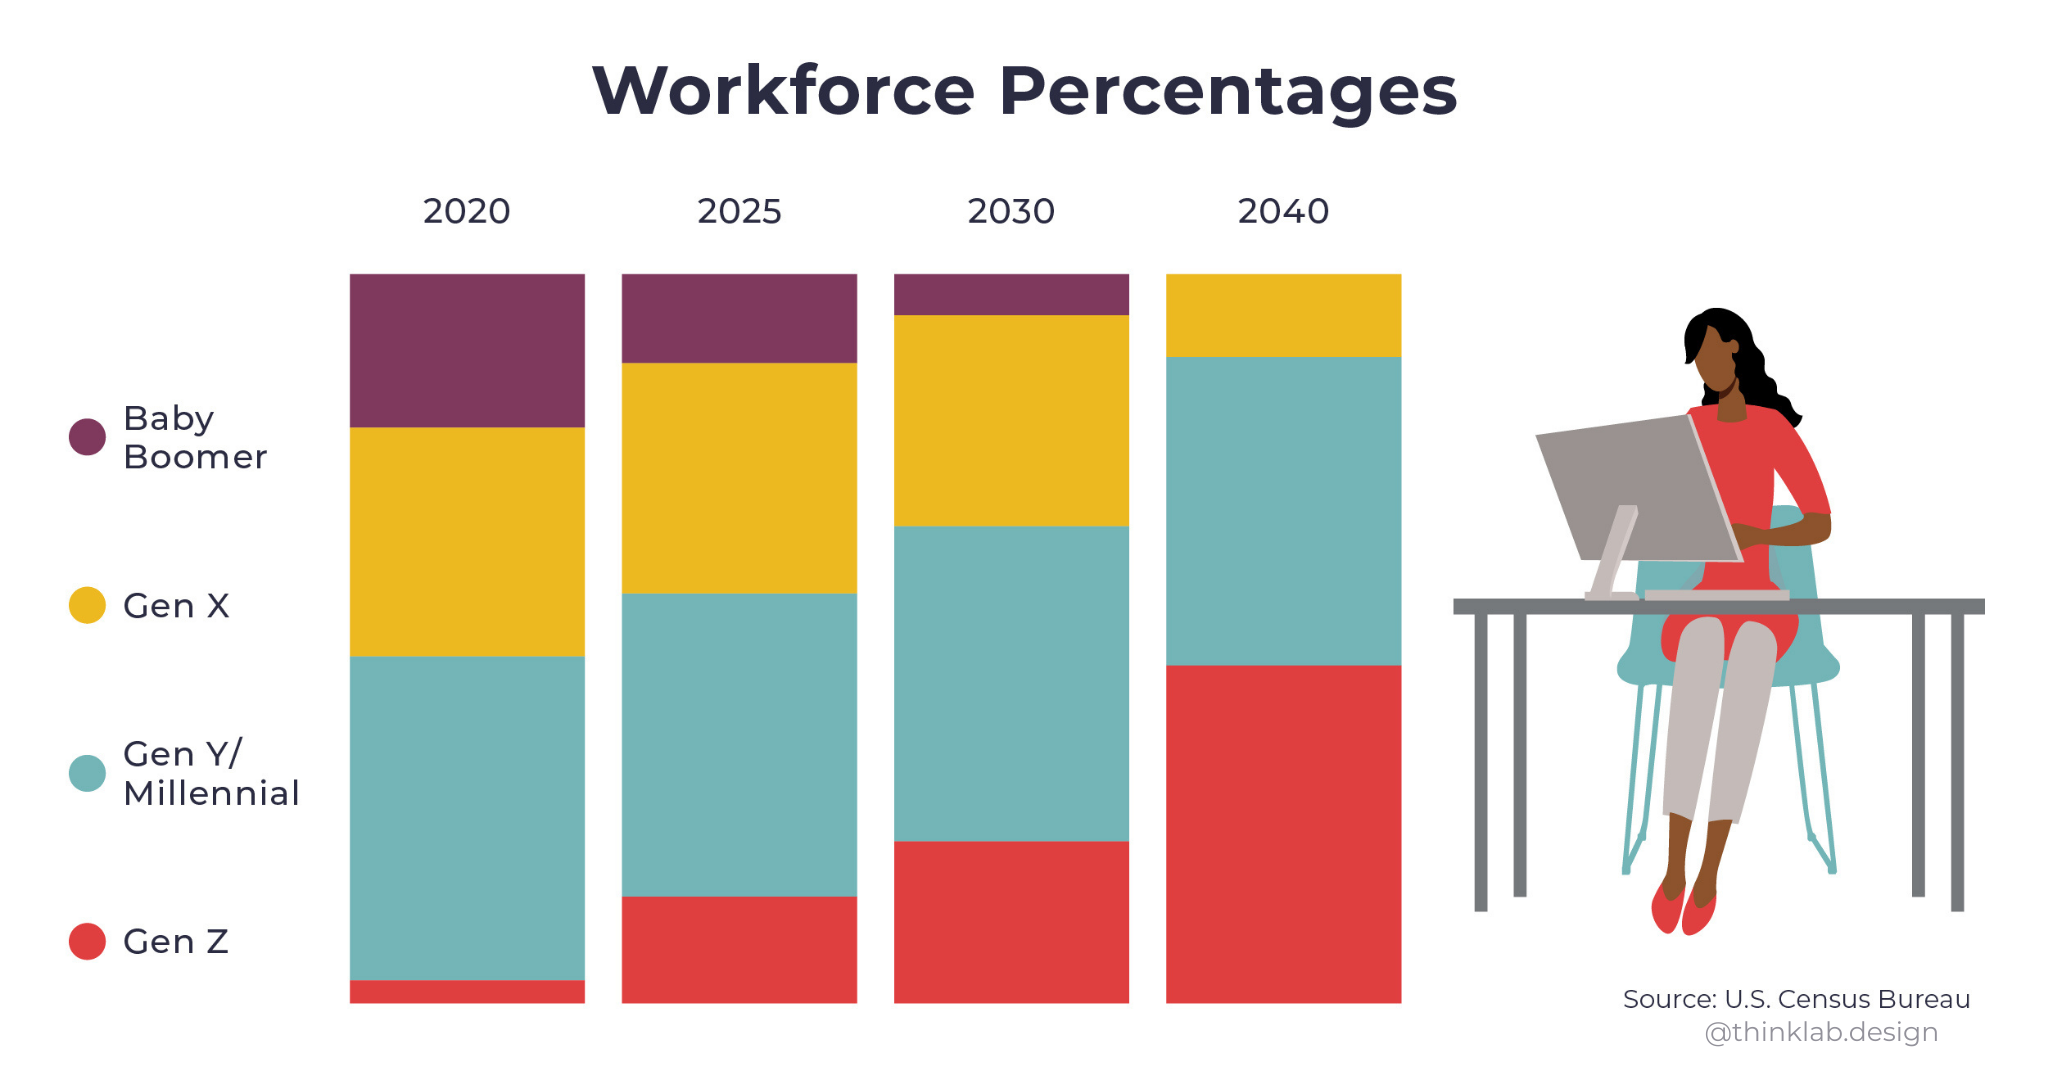 Chart showing workforce percentage predictions from 2020 to 2040 across Baby Boomer, Gen X, Gen Z and Millennials